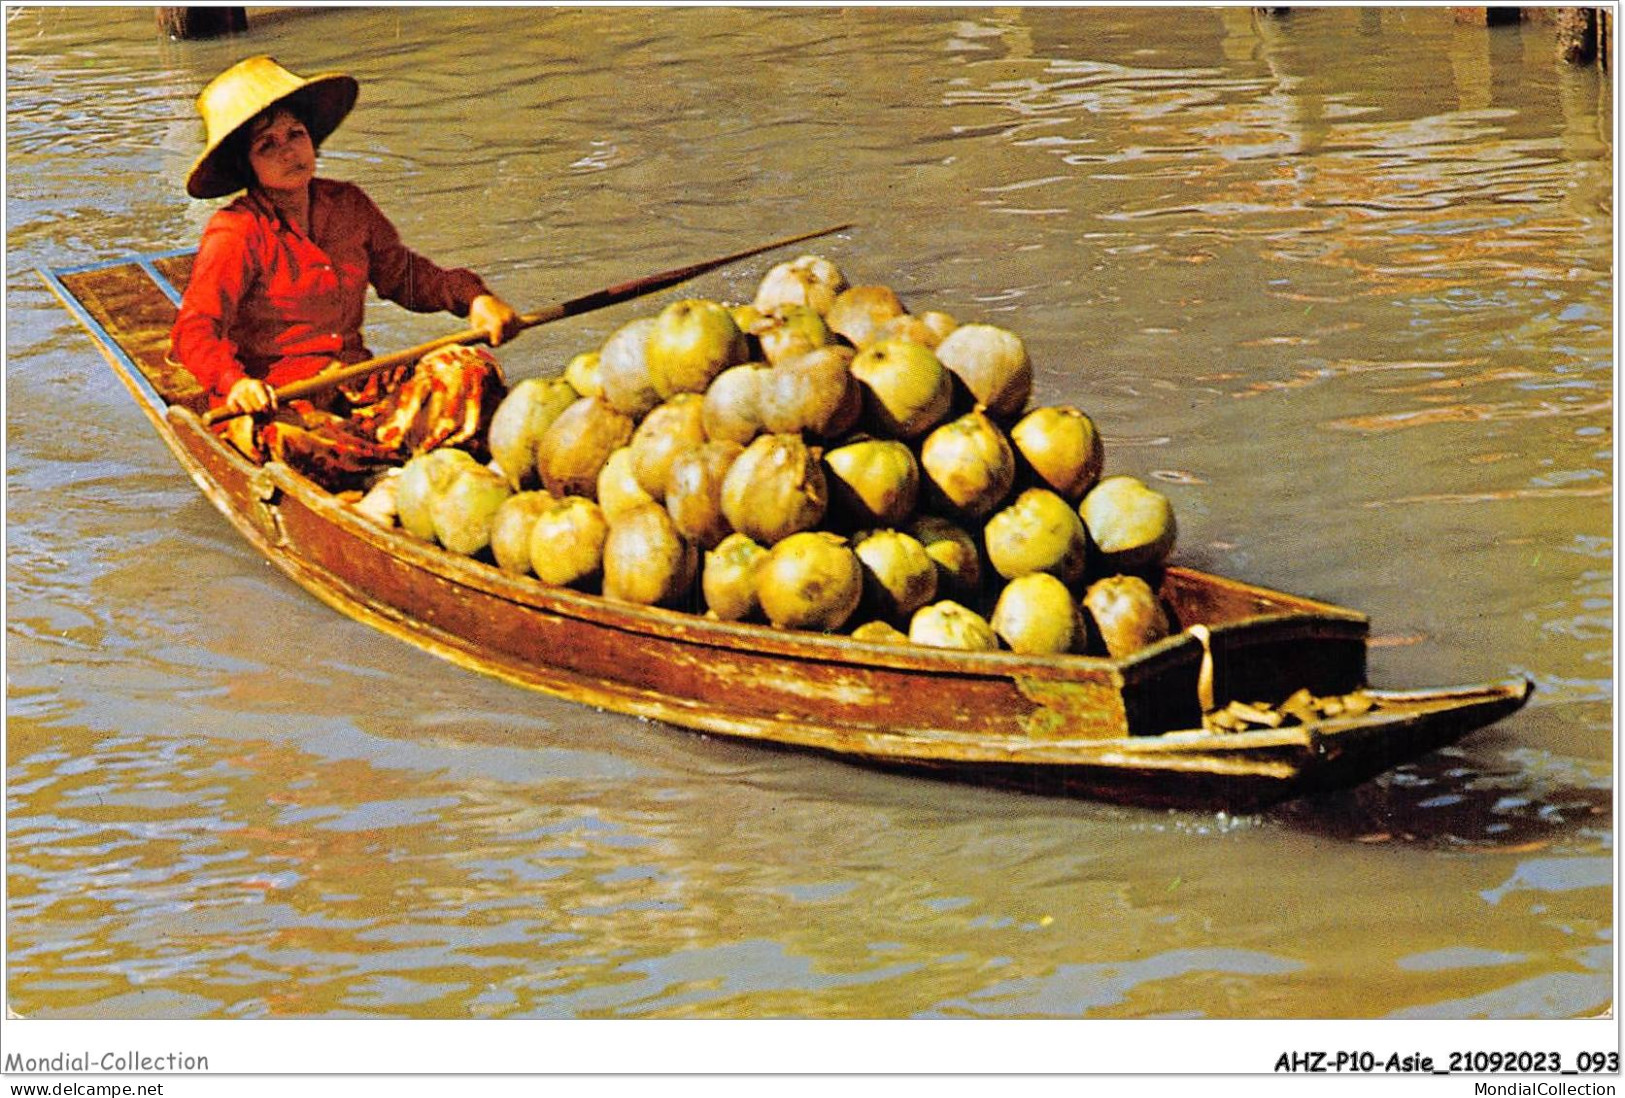 AHZP10-ASIE-0917 - THAI BOAT-VENDORS SELLING FRUITS AND VEGETABLES TO THE DWELLERS BY THE SIDES OF KHLONGS - Thailand